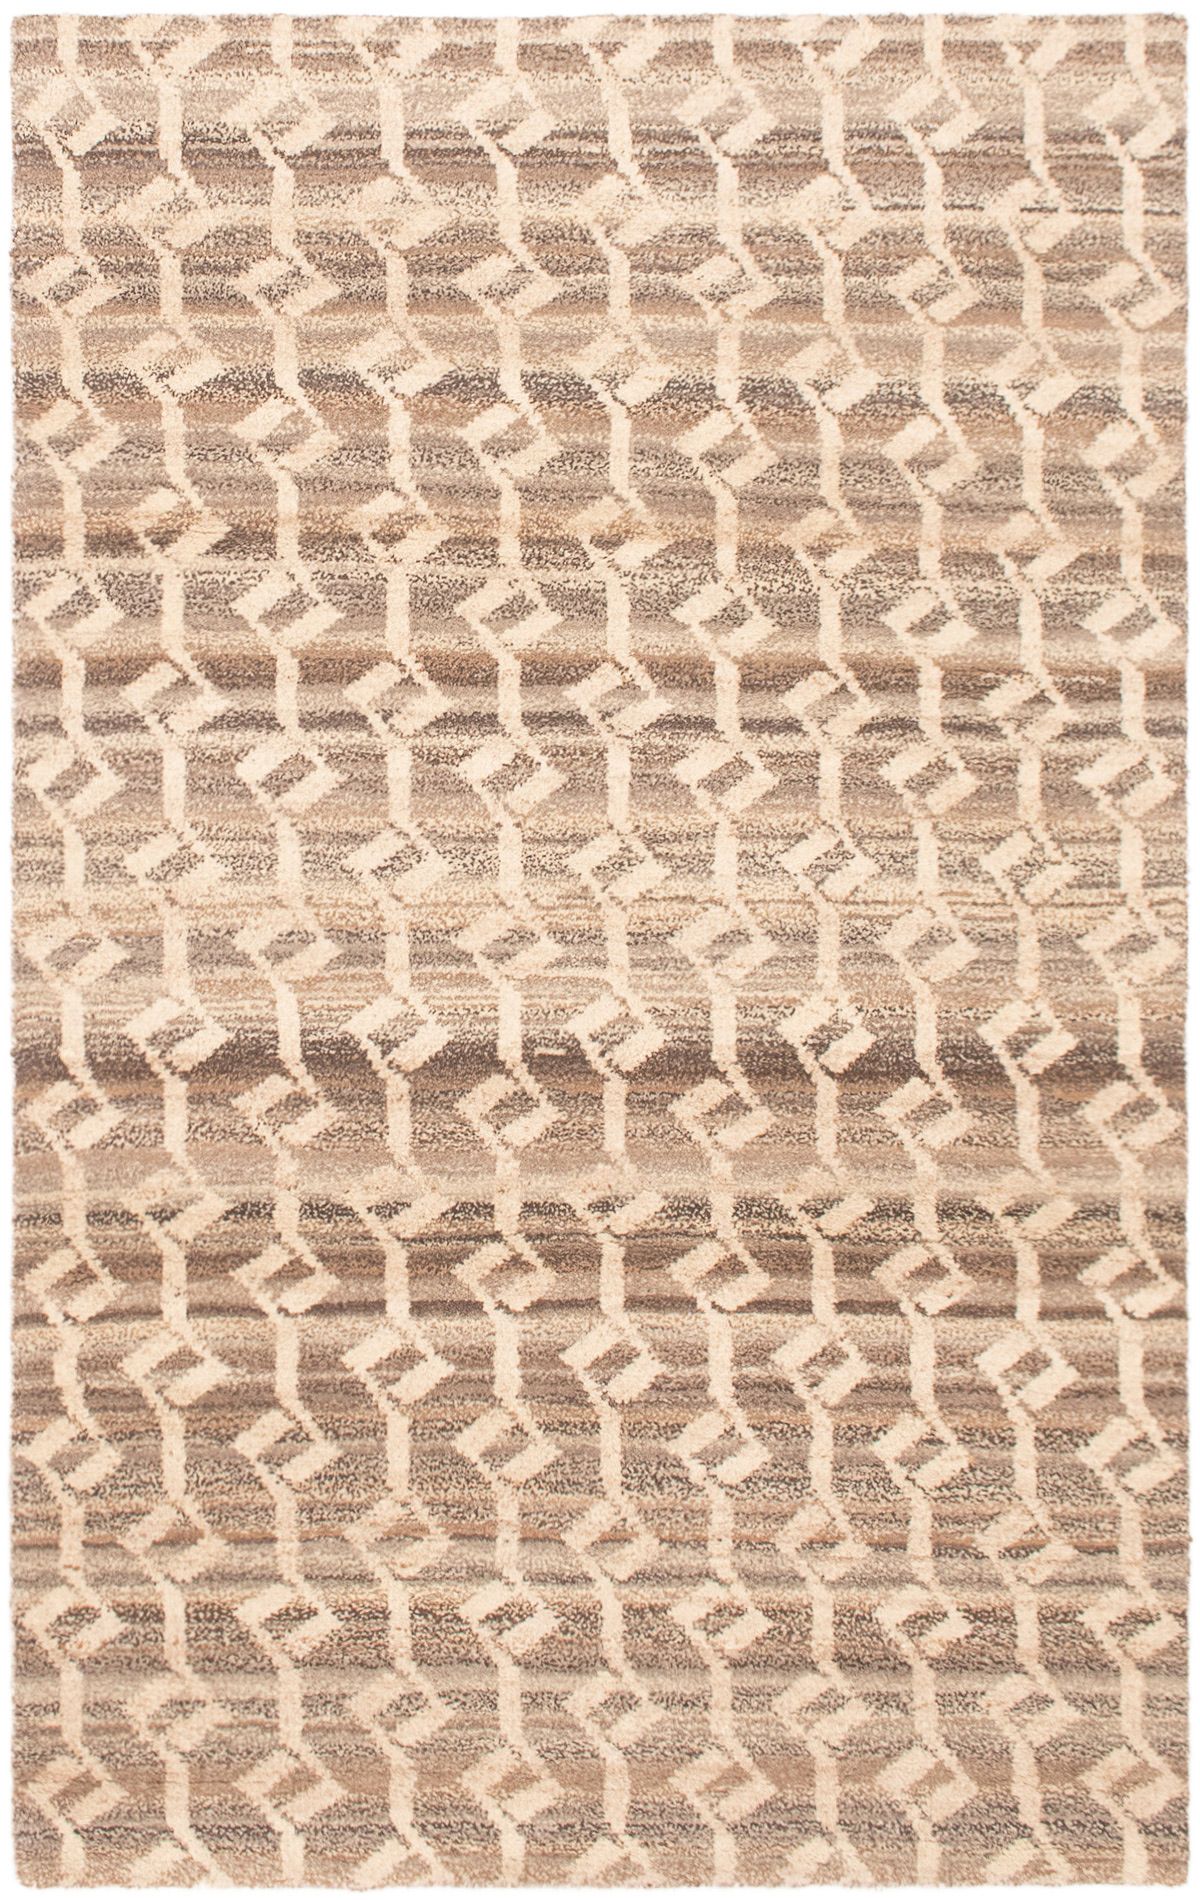 Hand-knotted Tangier Cream, Tan Wool Rug 5'0" x 7'11"  Size: 5'0" x 7'11"  